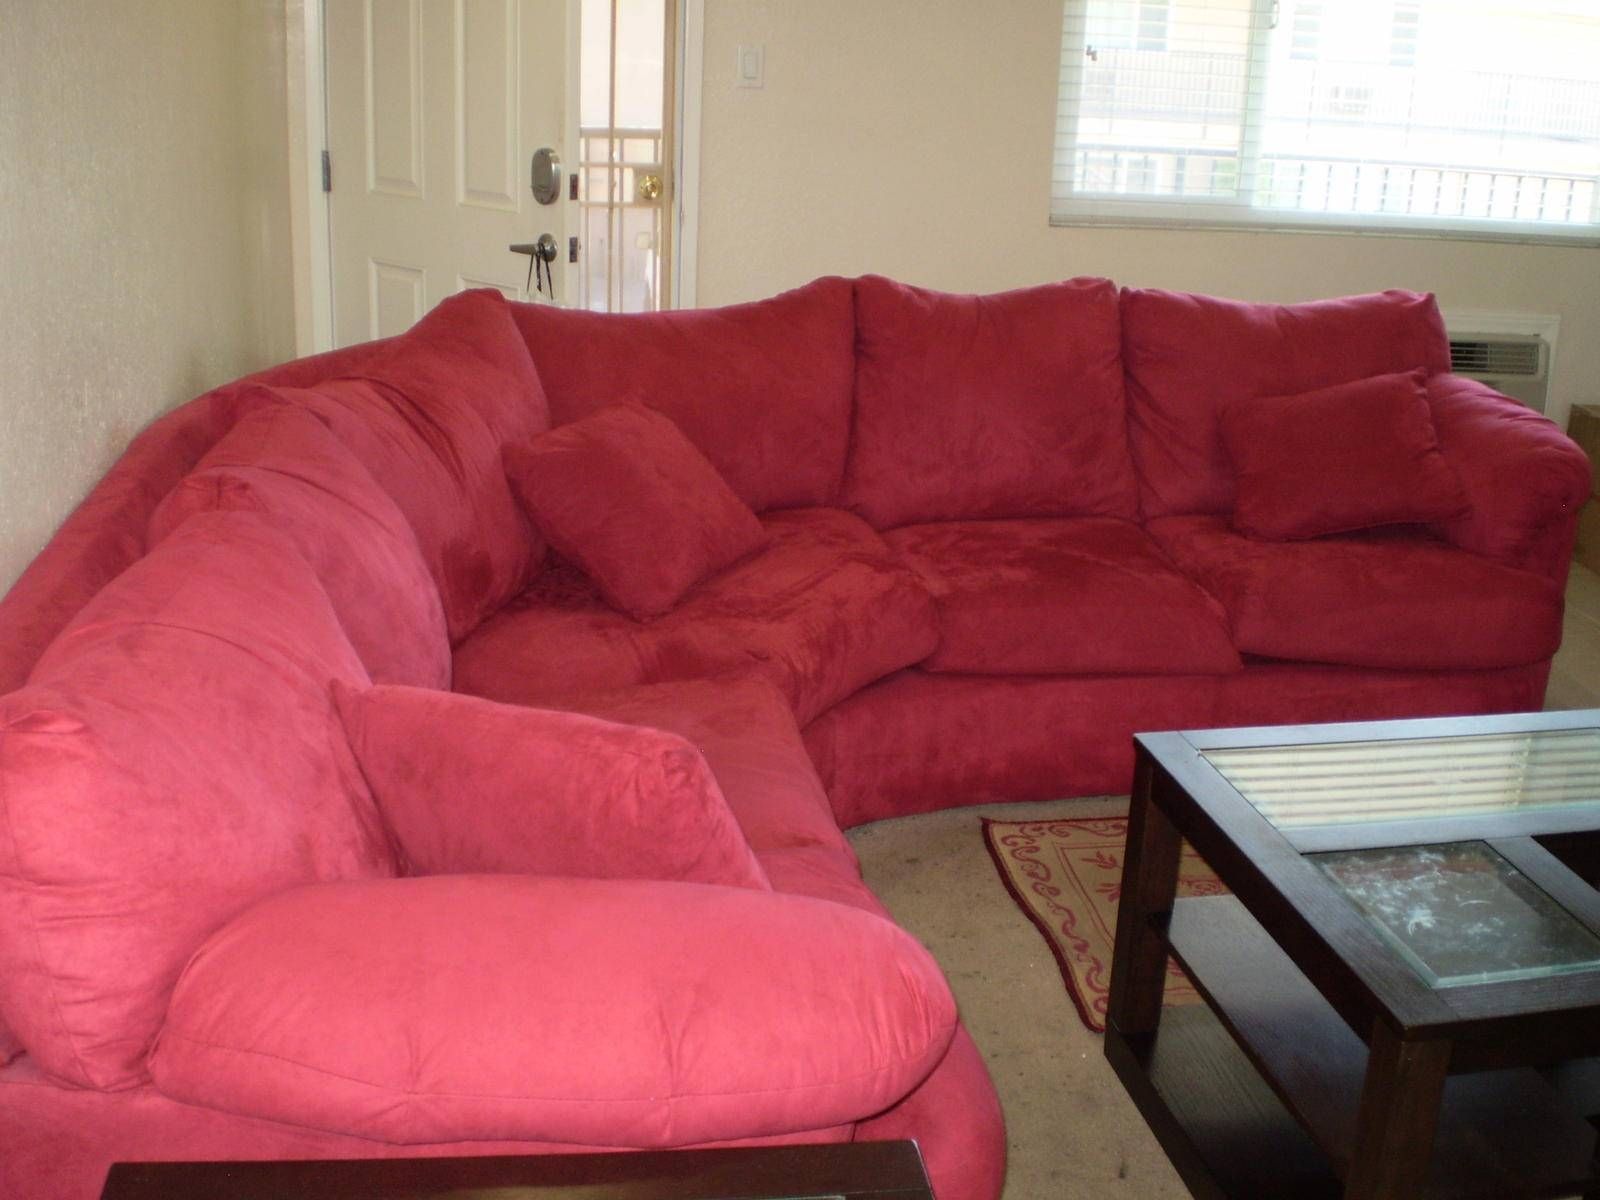 Selling The Unique And Good Quality Of Sectional Sofas For Sale Regarding Quality Sectional Sofa (View 16 of 30)